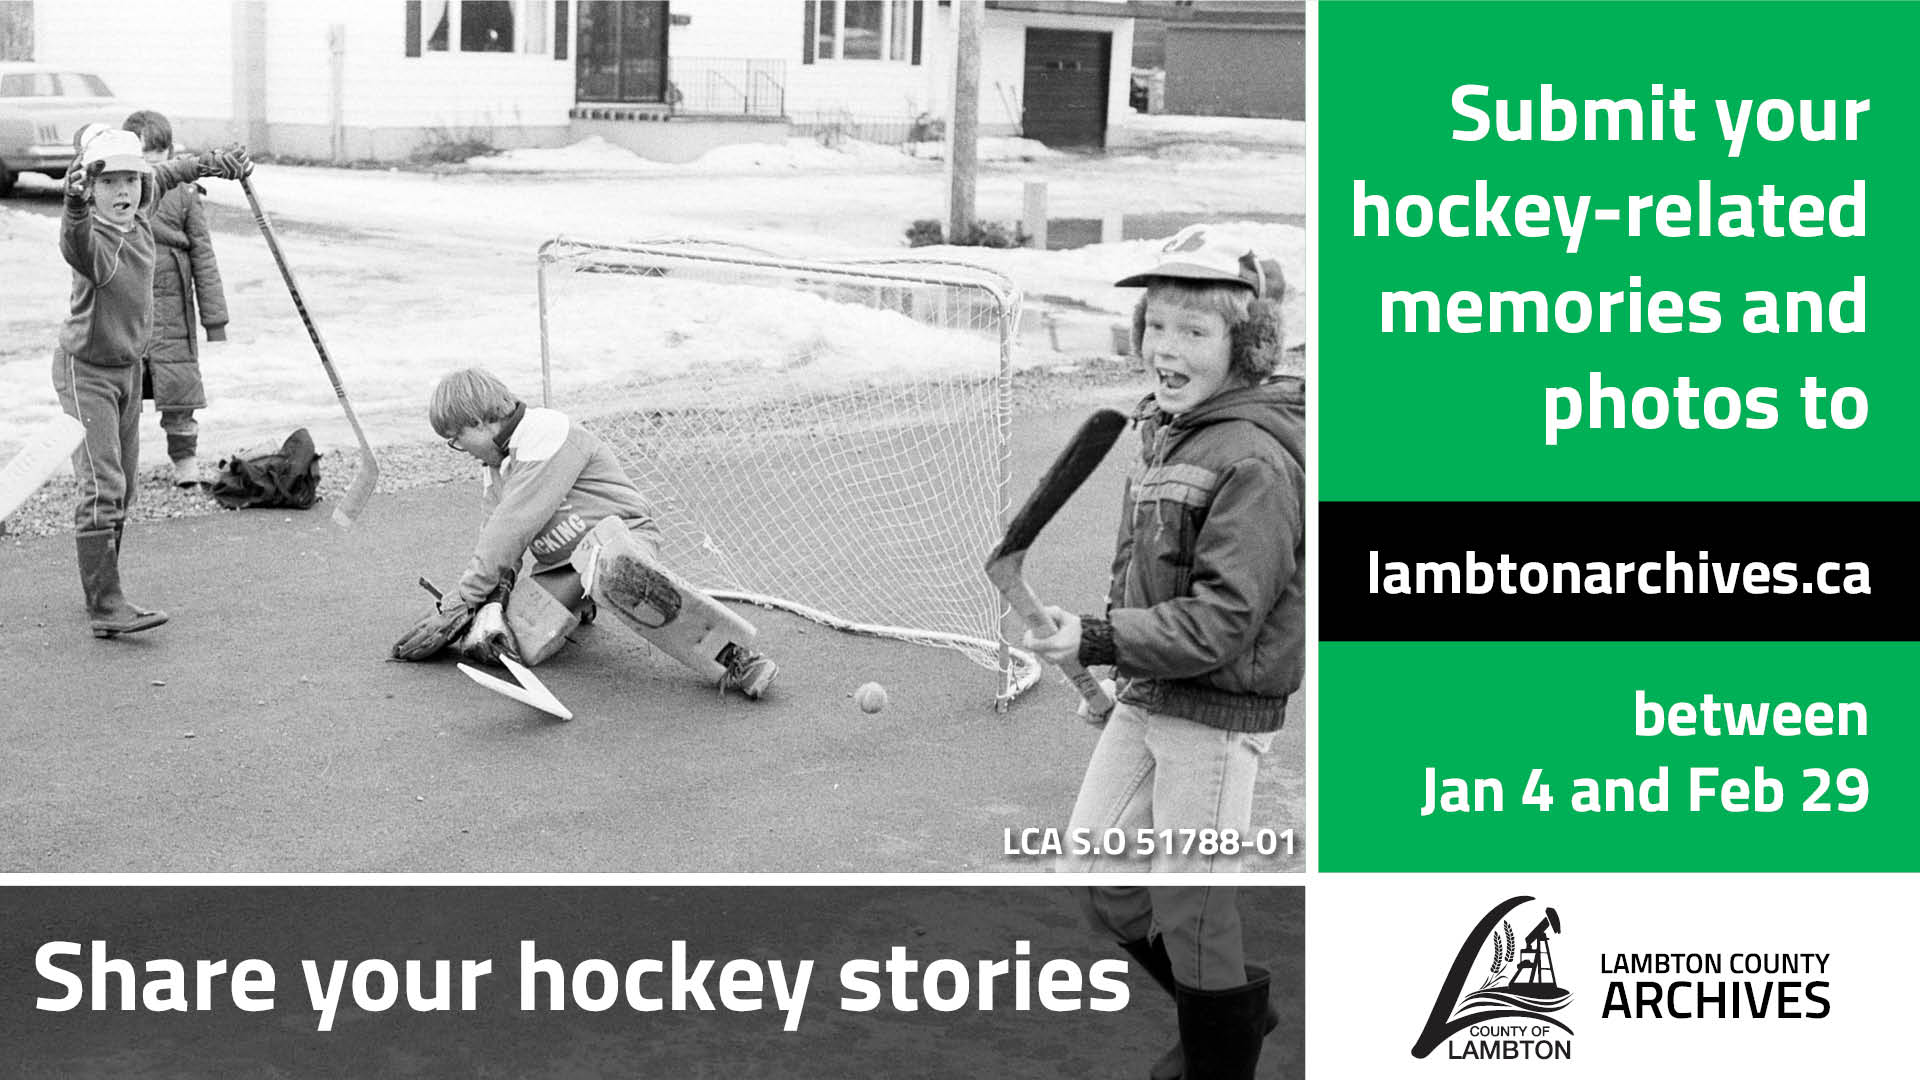 Historical image of kids playing road hockey. Text: submit your hockey related memories and photos to lambtonarchives.ca between January 4 and February 29